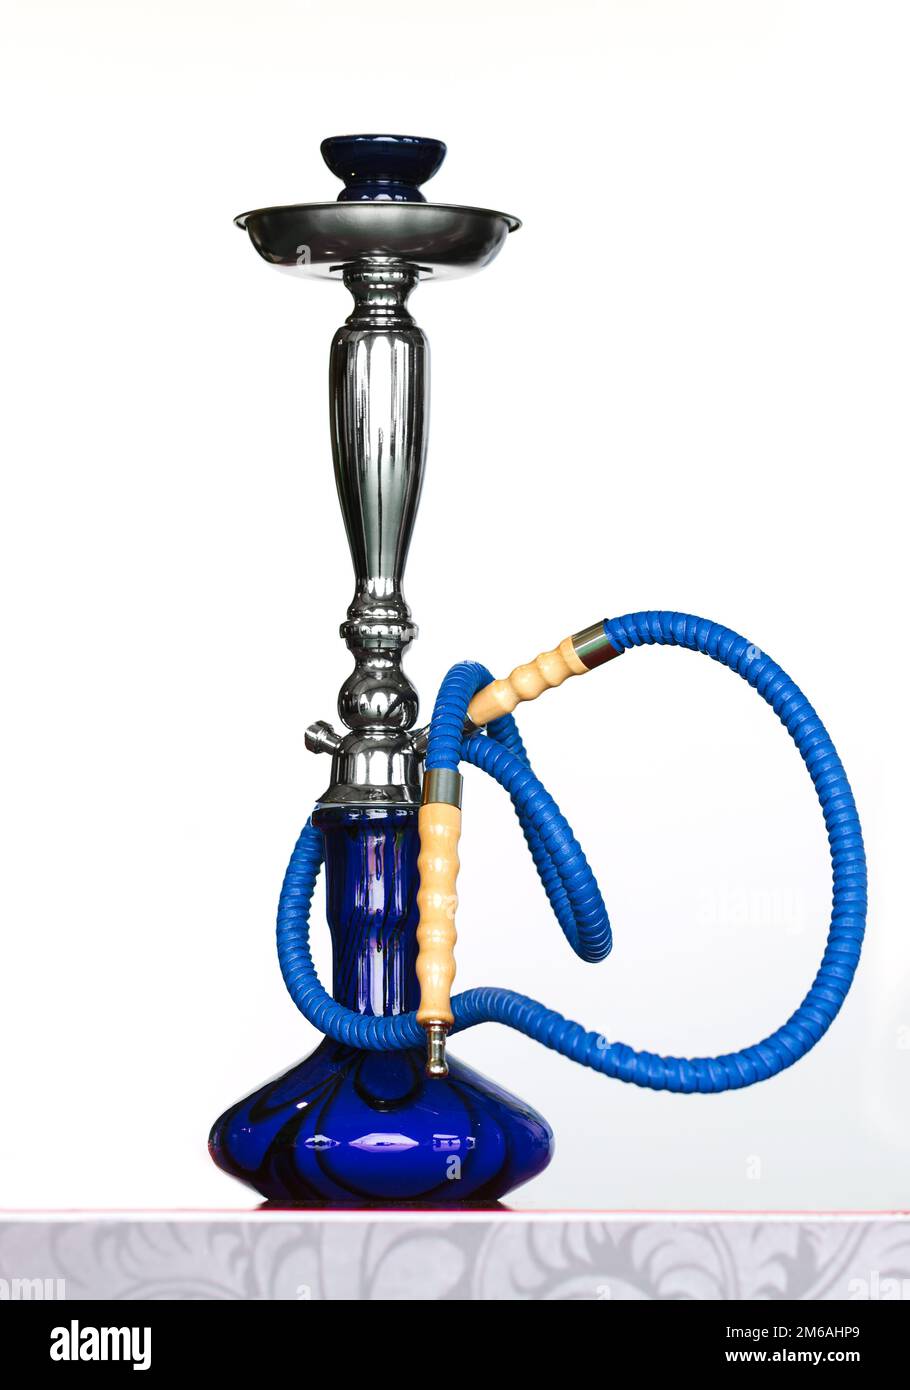 Glass pipe or bong for marijuana smoking on a blue fabric background Stock  Photo - Alamy